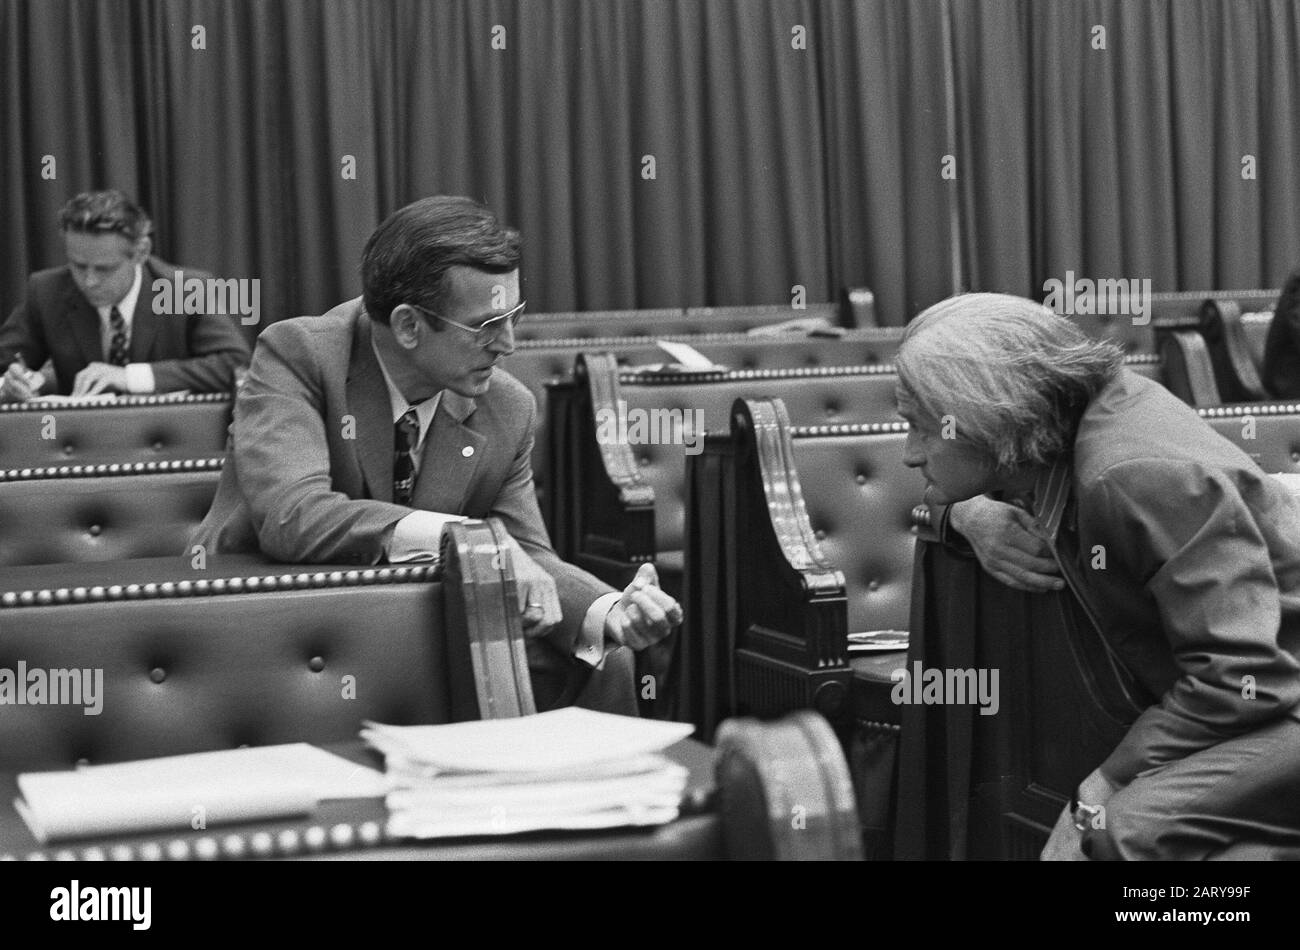 Second Chamber, Drees jr. with hairpiece (head) Date: August 29, 1973 Keywords: political Person name: Drees, Willem (jr.) Stock Photo